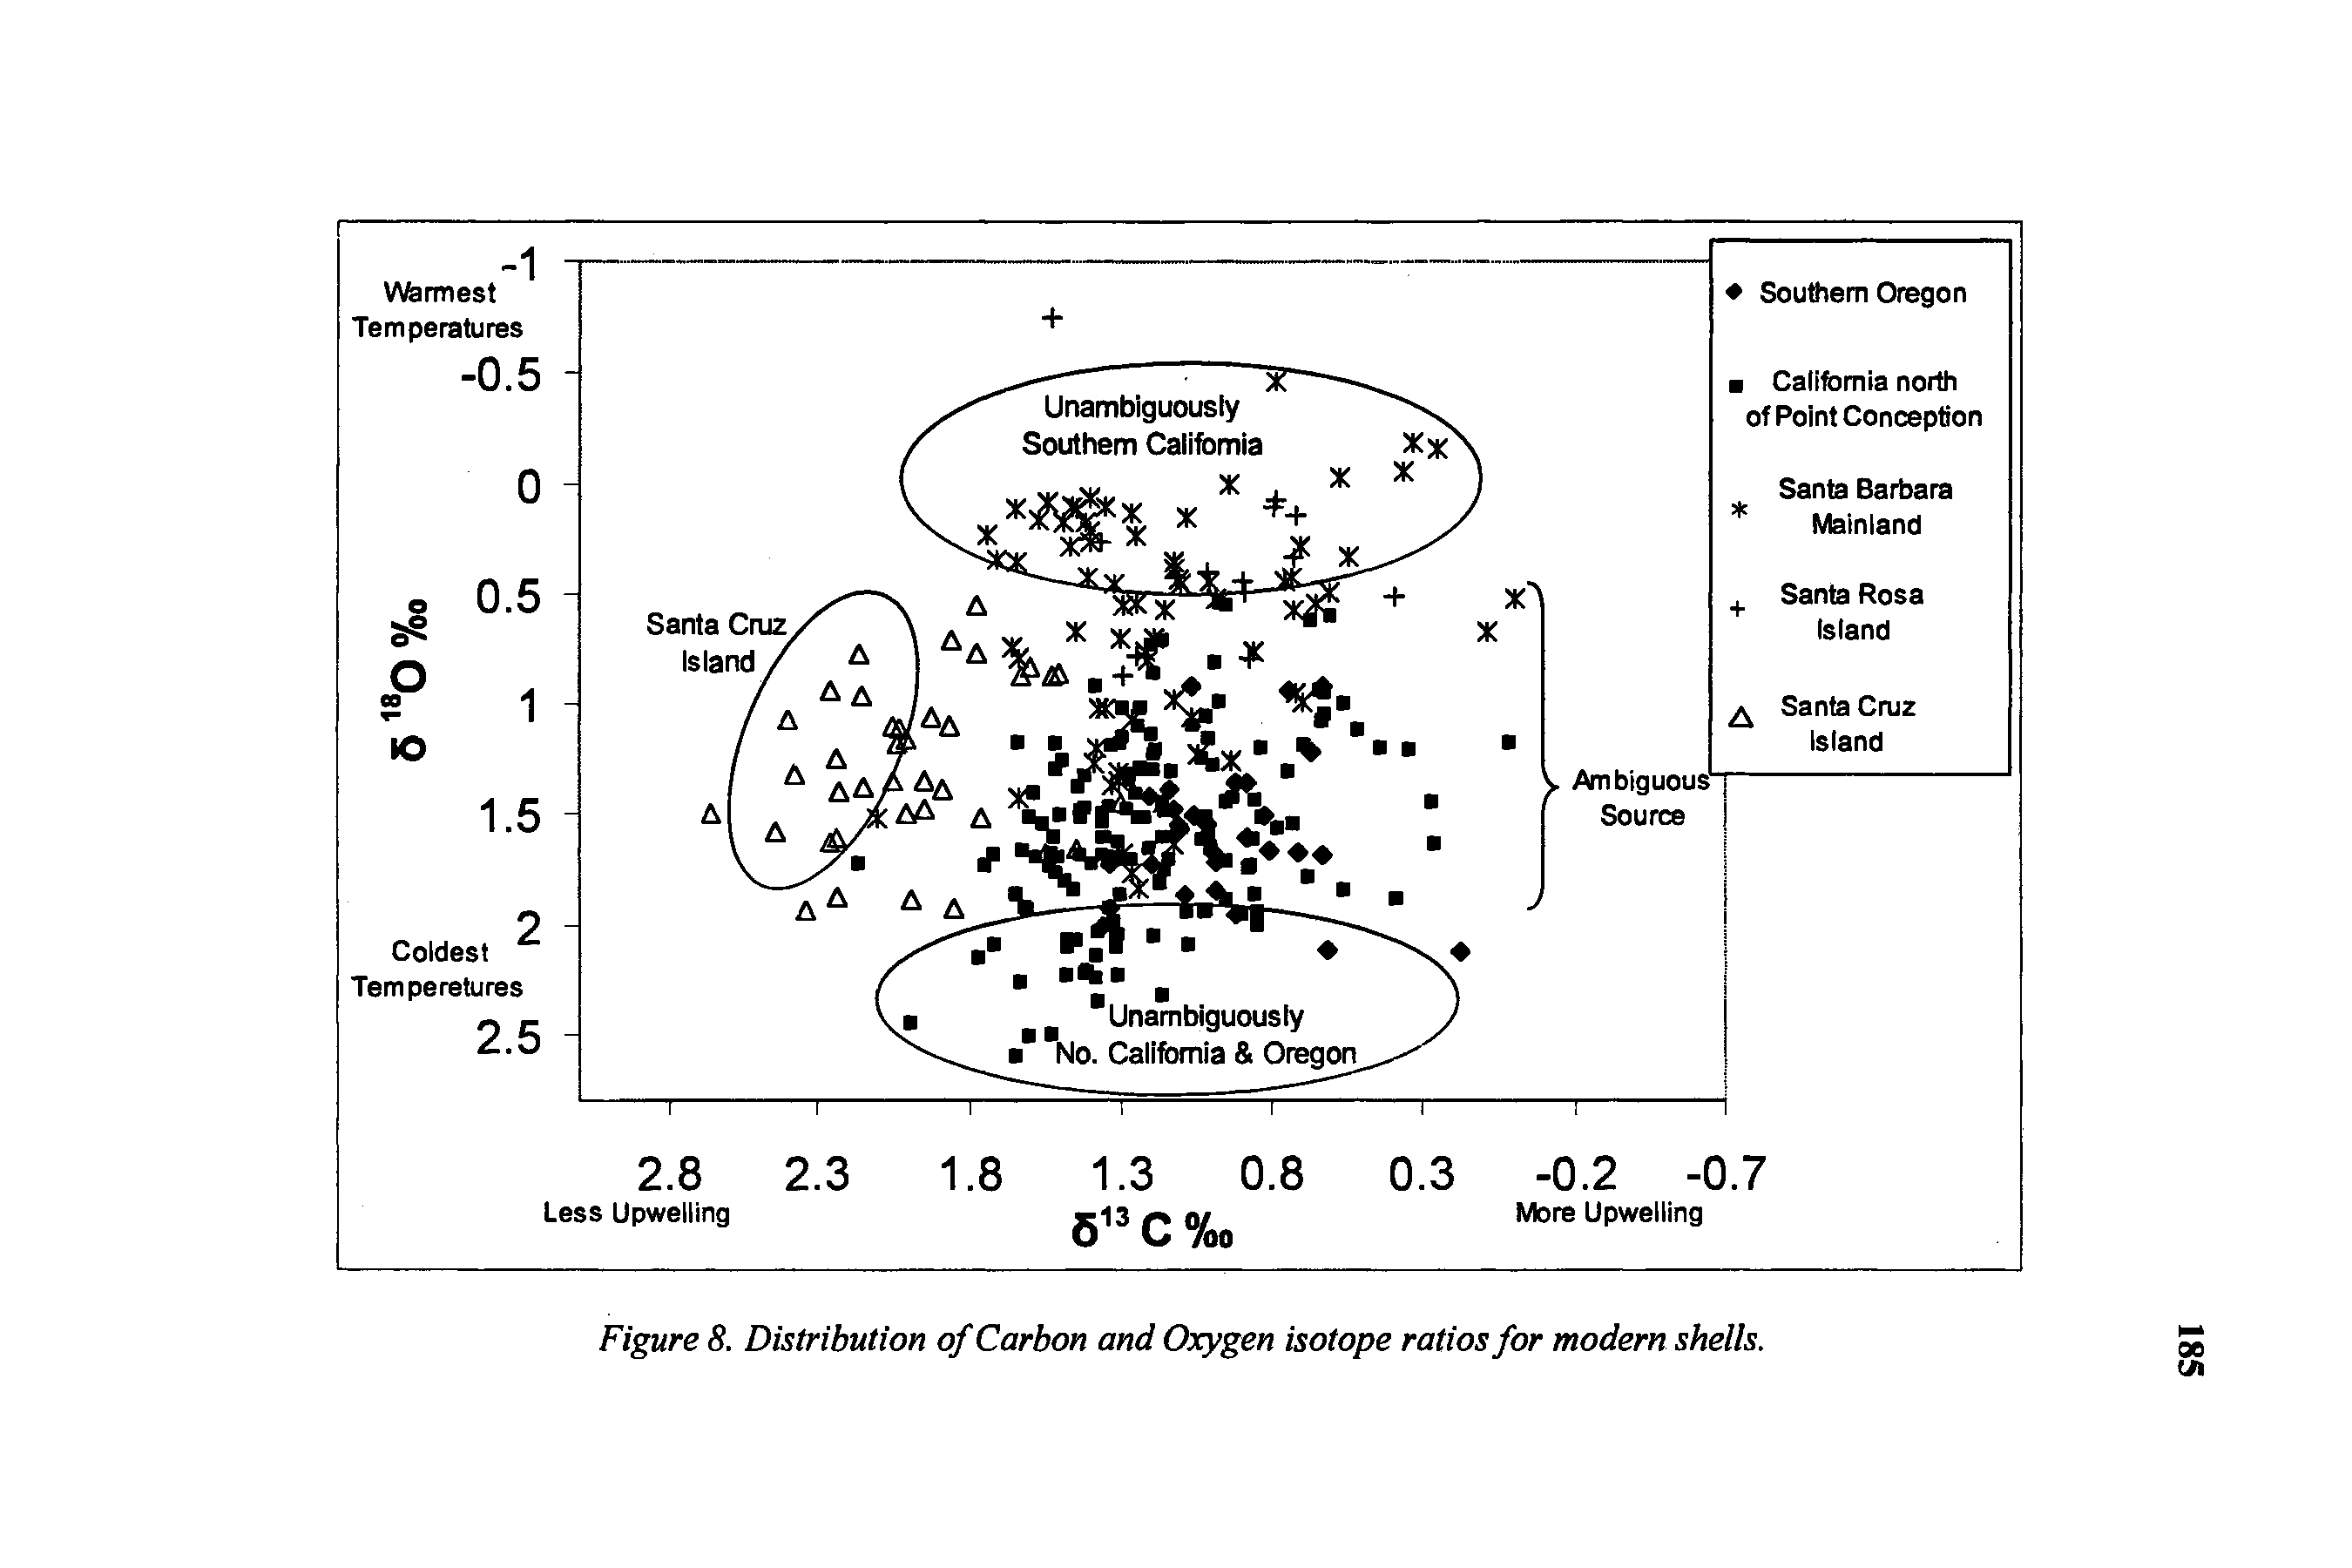 Figure 8. Distribution of Carbon and Oxygen isotope ratios for modern shells.